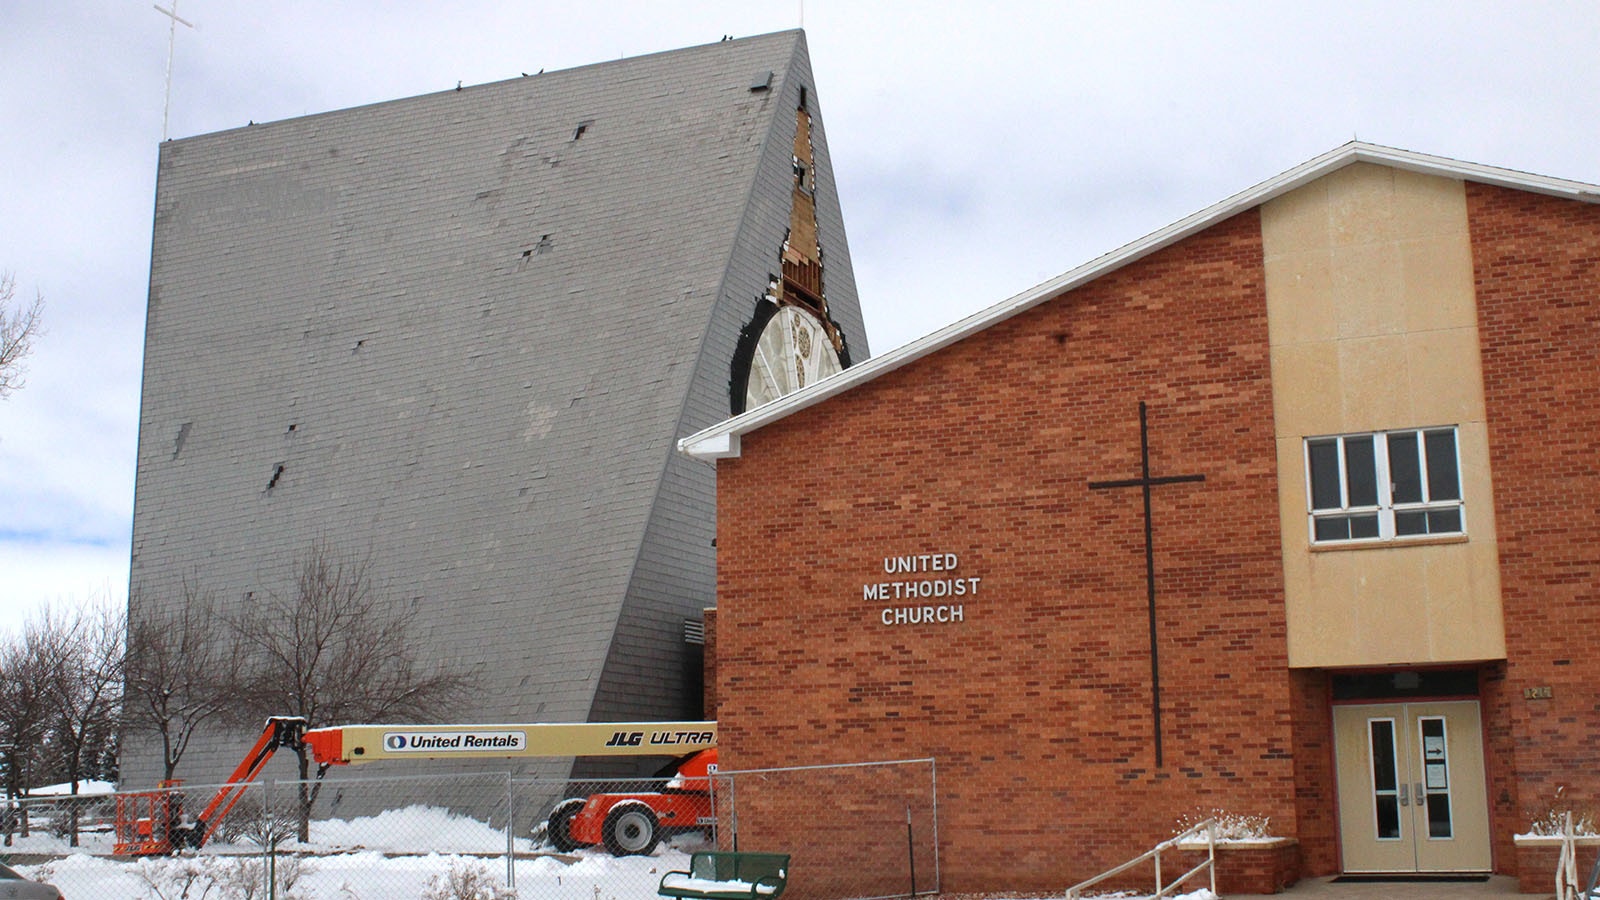 For more than 50 years, the unique angular 90-foot-tall First United Methodist Church in Laramie has been a landmark, nicknamed the "Boat Church."